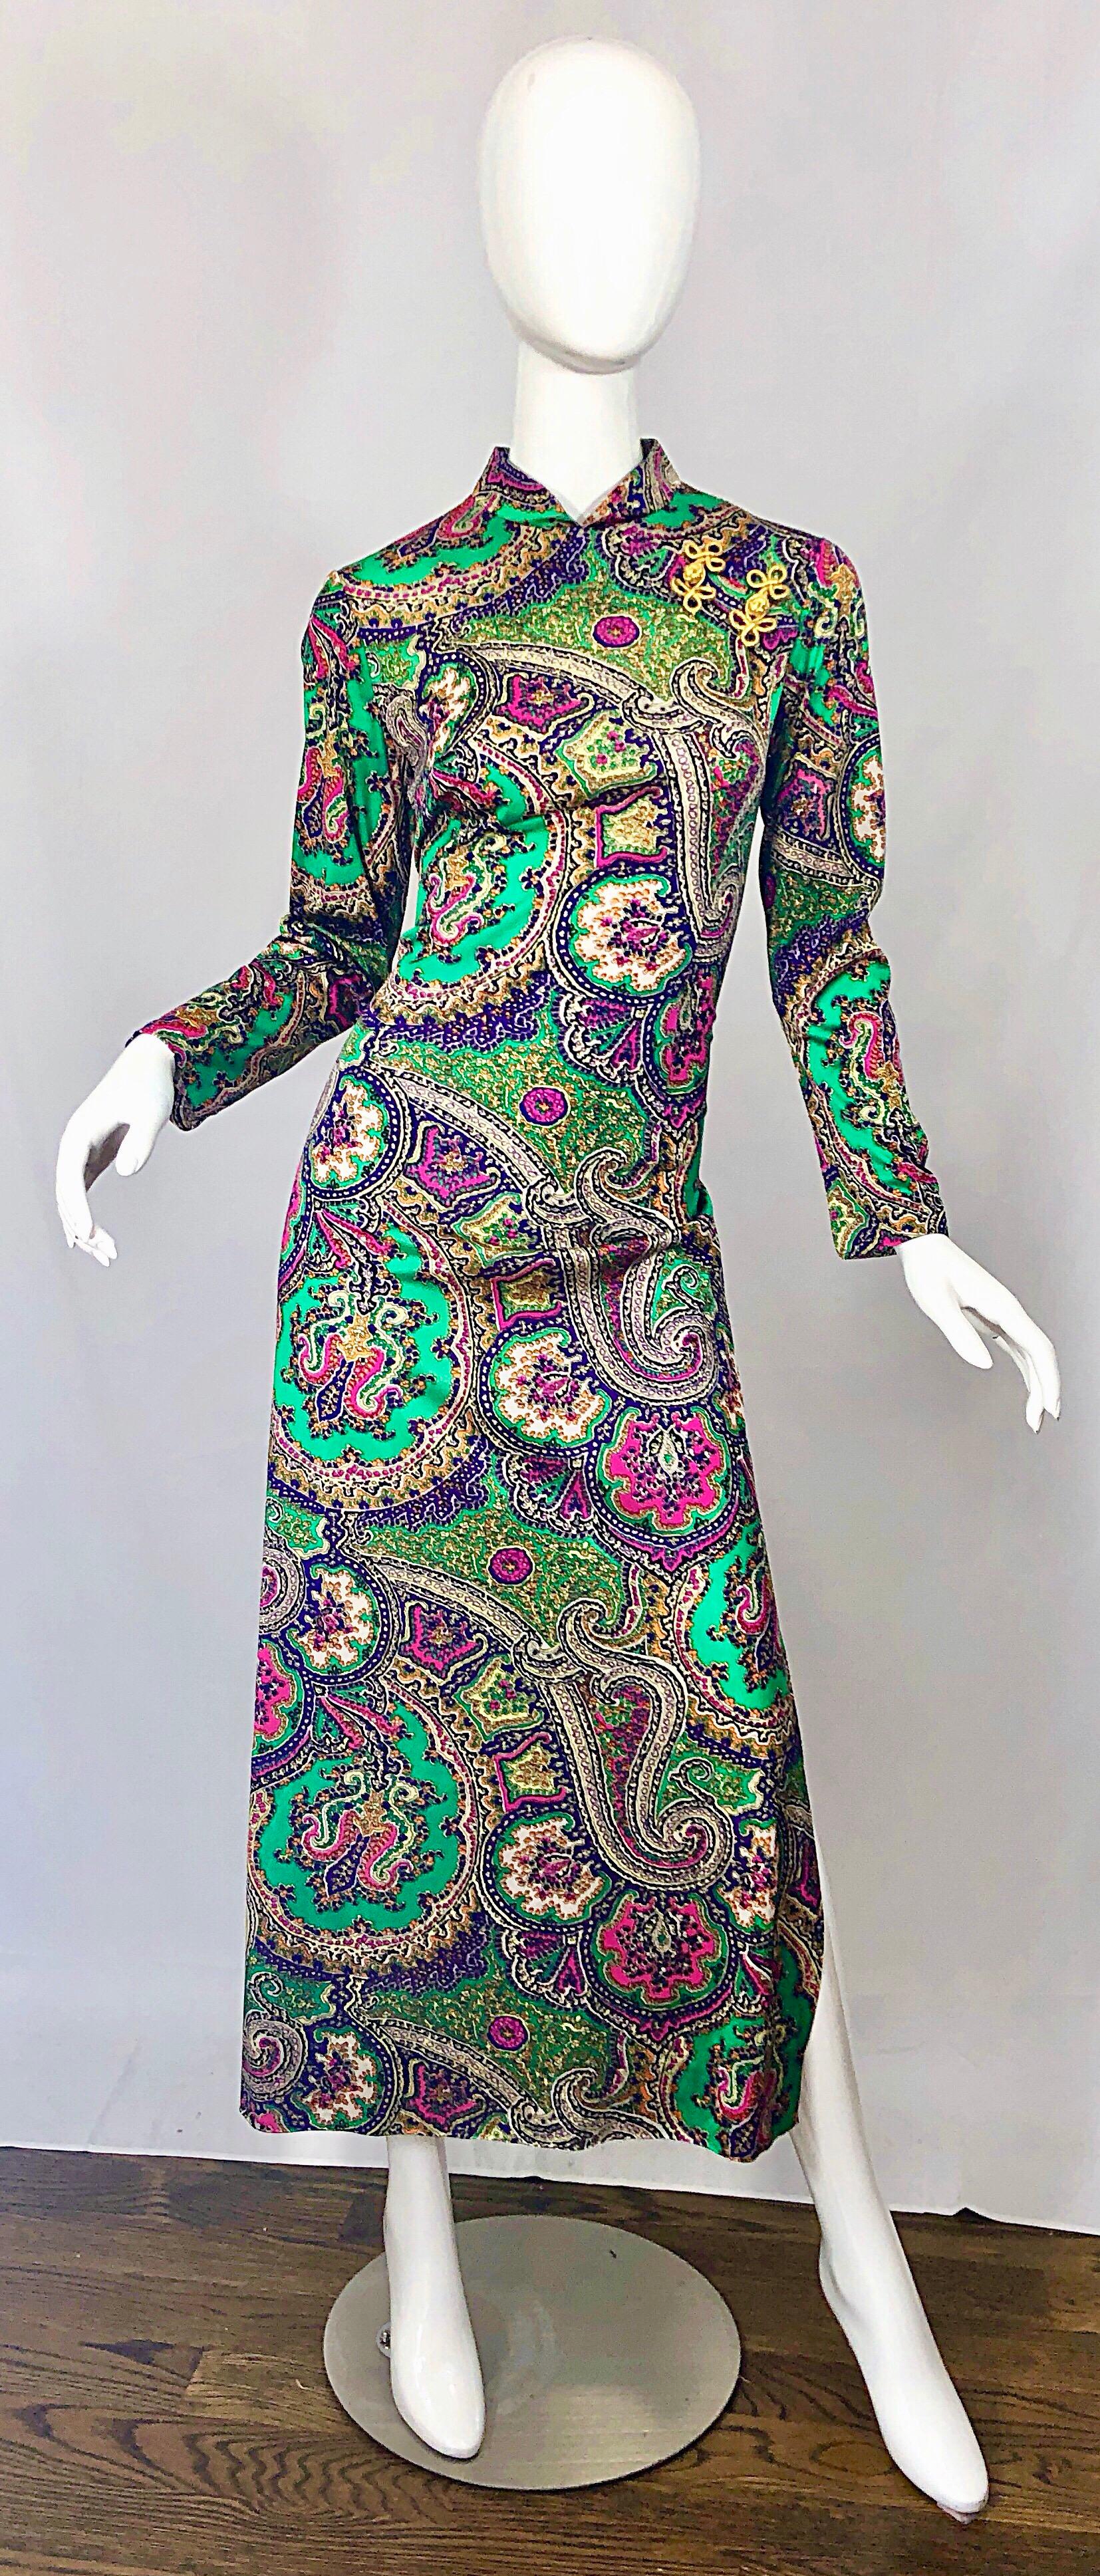 Incredible vintage 70s cheongsam Asian inspired colorful paisley print jersey maxi dress! Features metallic gold embroidery at top left shoulder. Vibrant colors of kelly green, purple, pink, fuchsia and white throughout. Full metal zipper up the